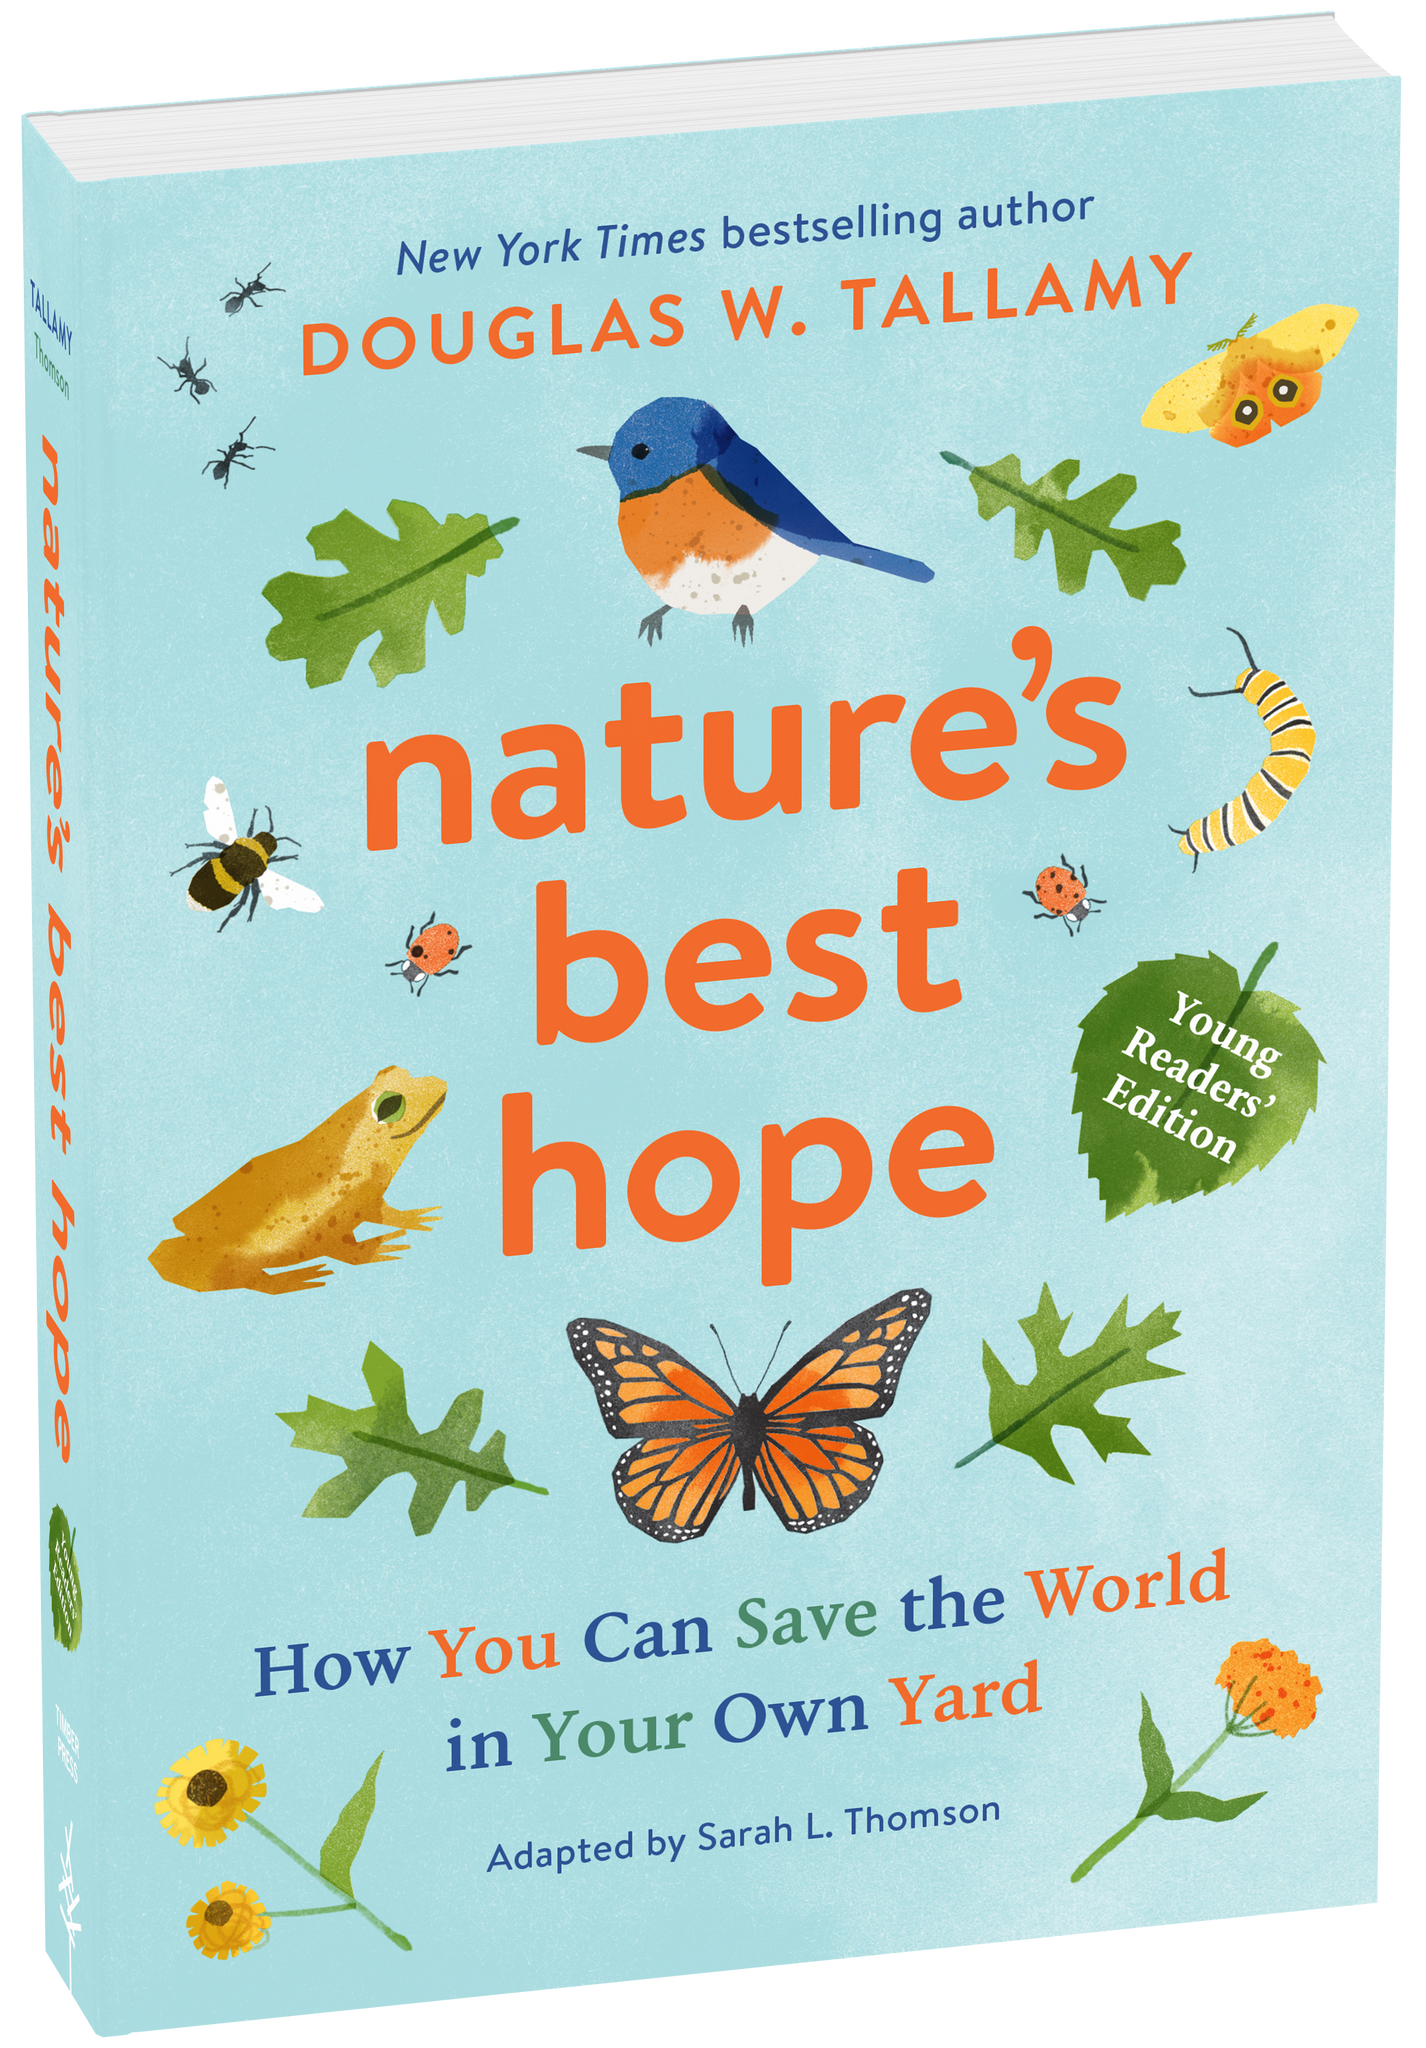 Nature's Best Hope - Young Reader's Edition